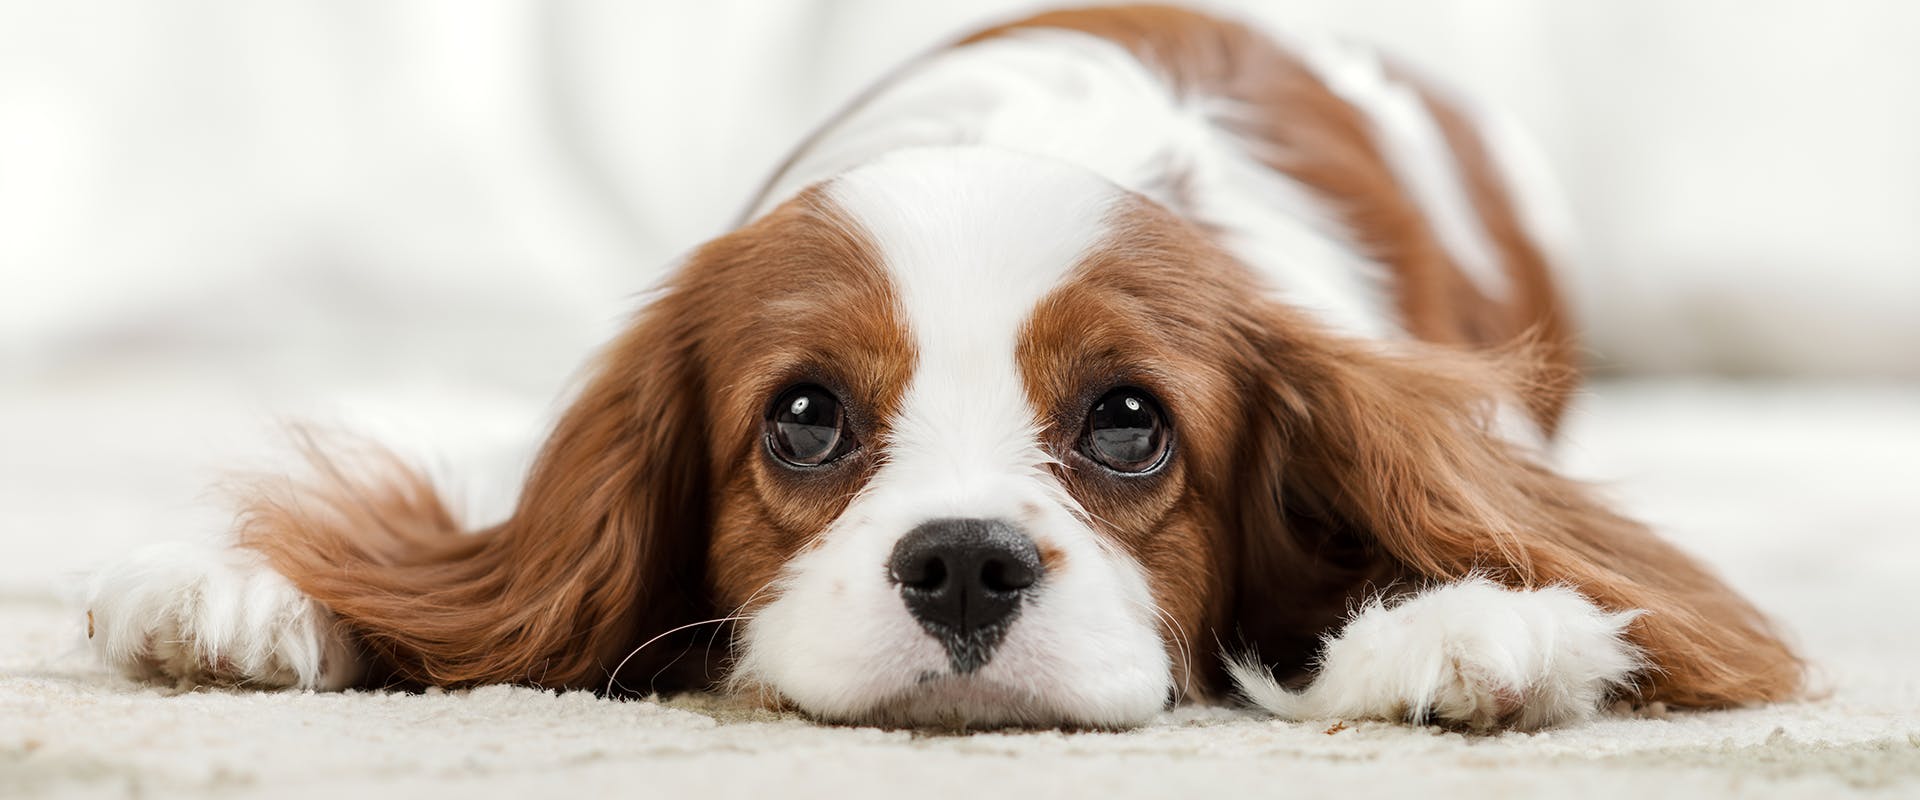 A Cavalier King Charles Spaniel with long floppy ears laying on the floor 